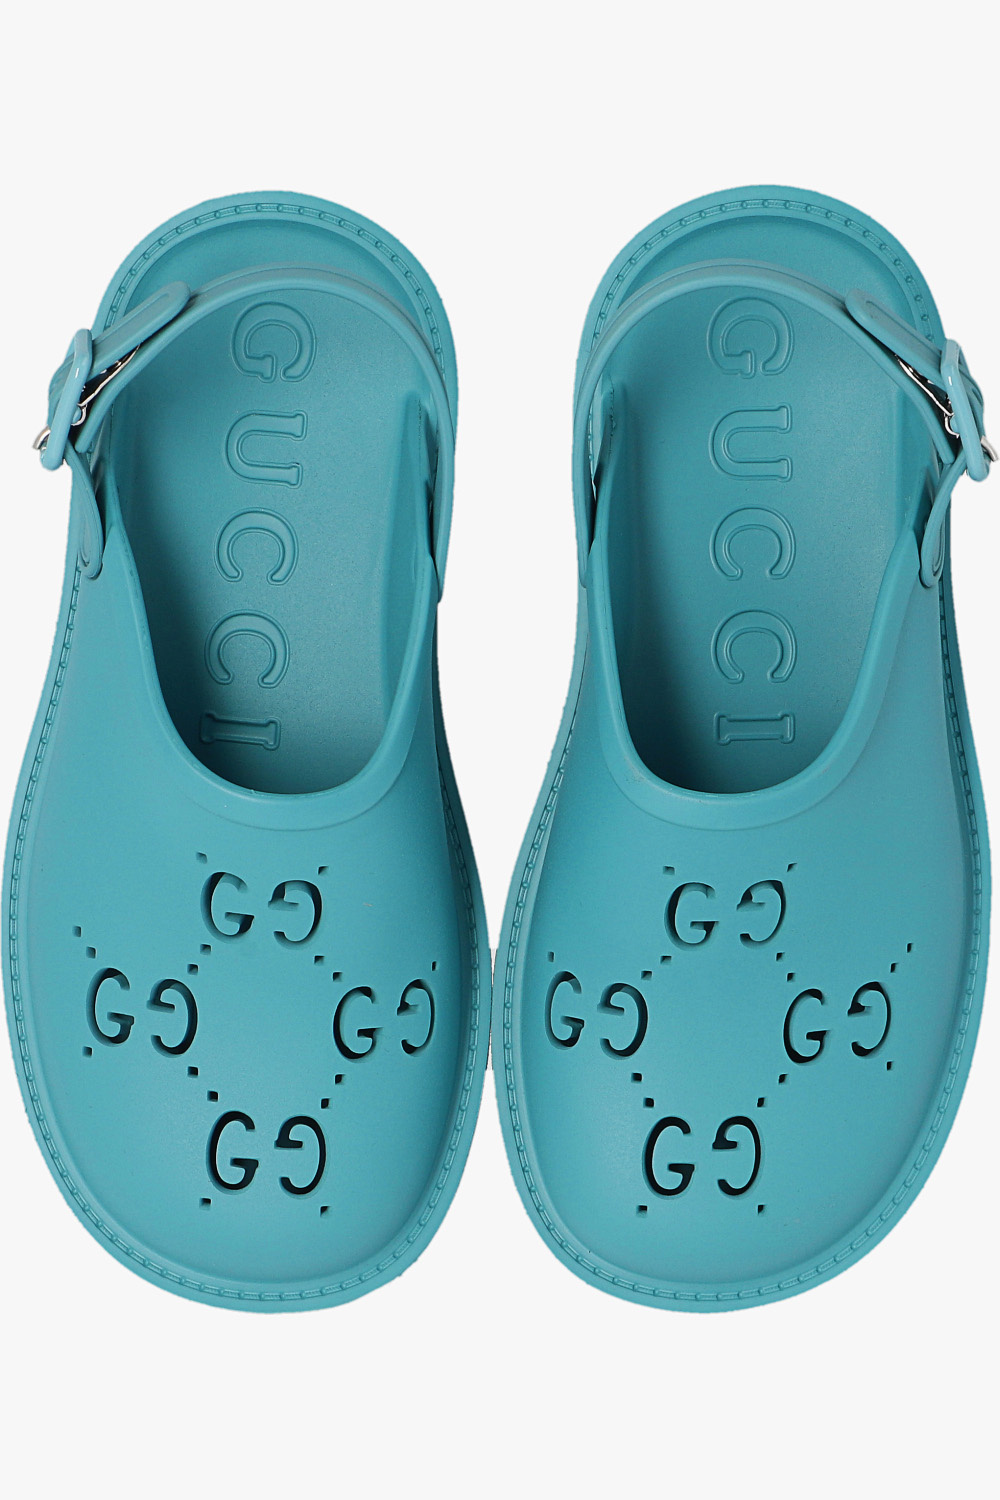 Gucci Kids shoes have with monogram